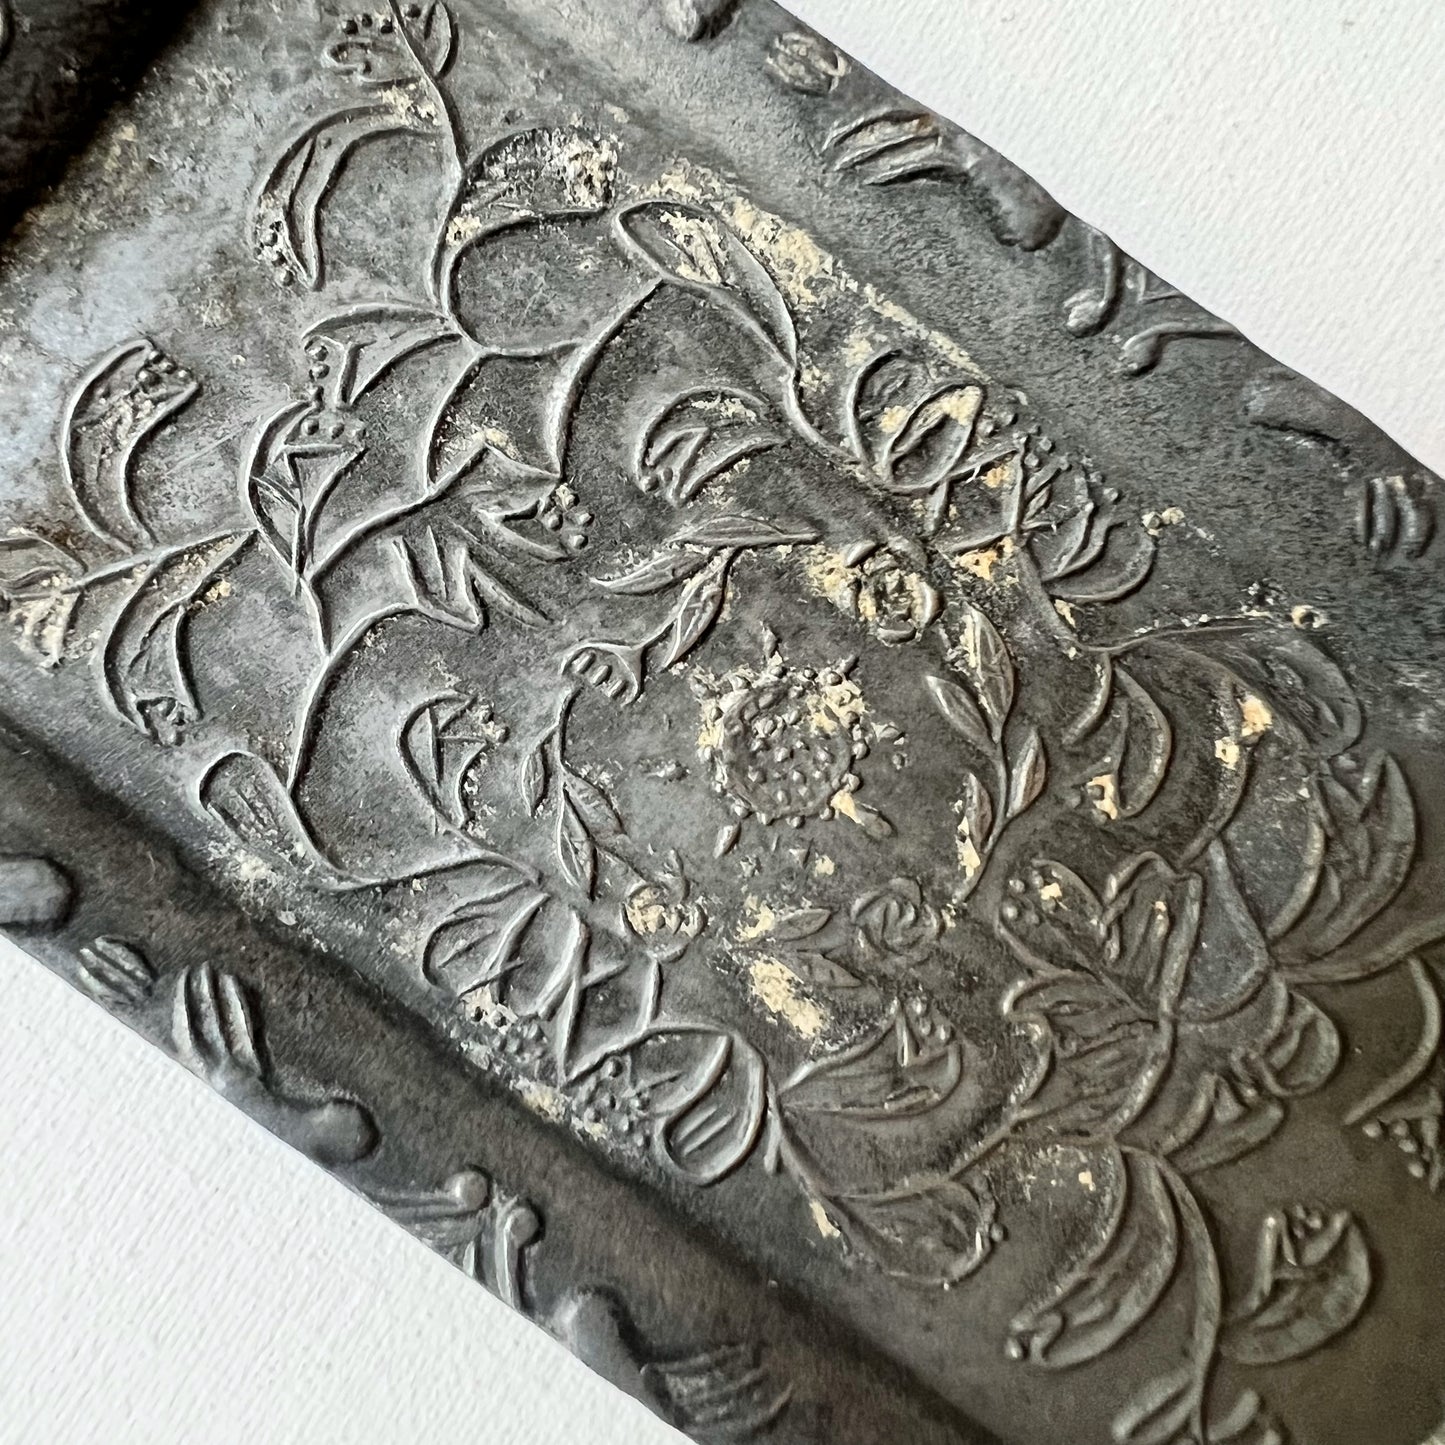 【Antique】France - 1920s Floral Metal Tray